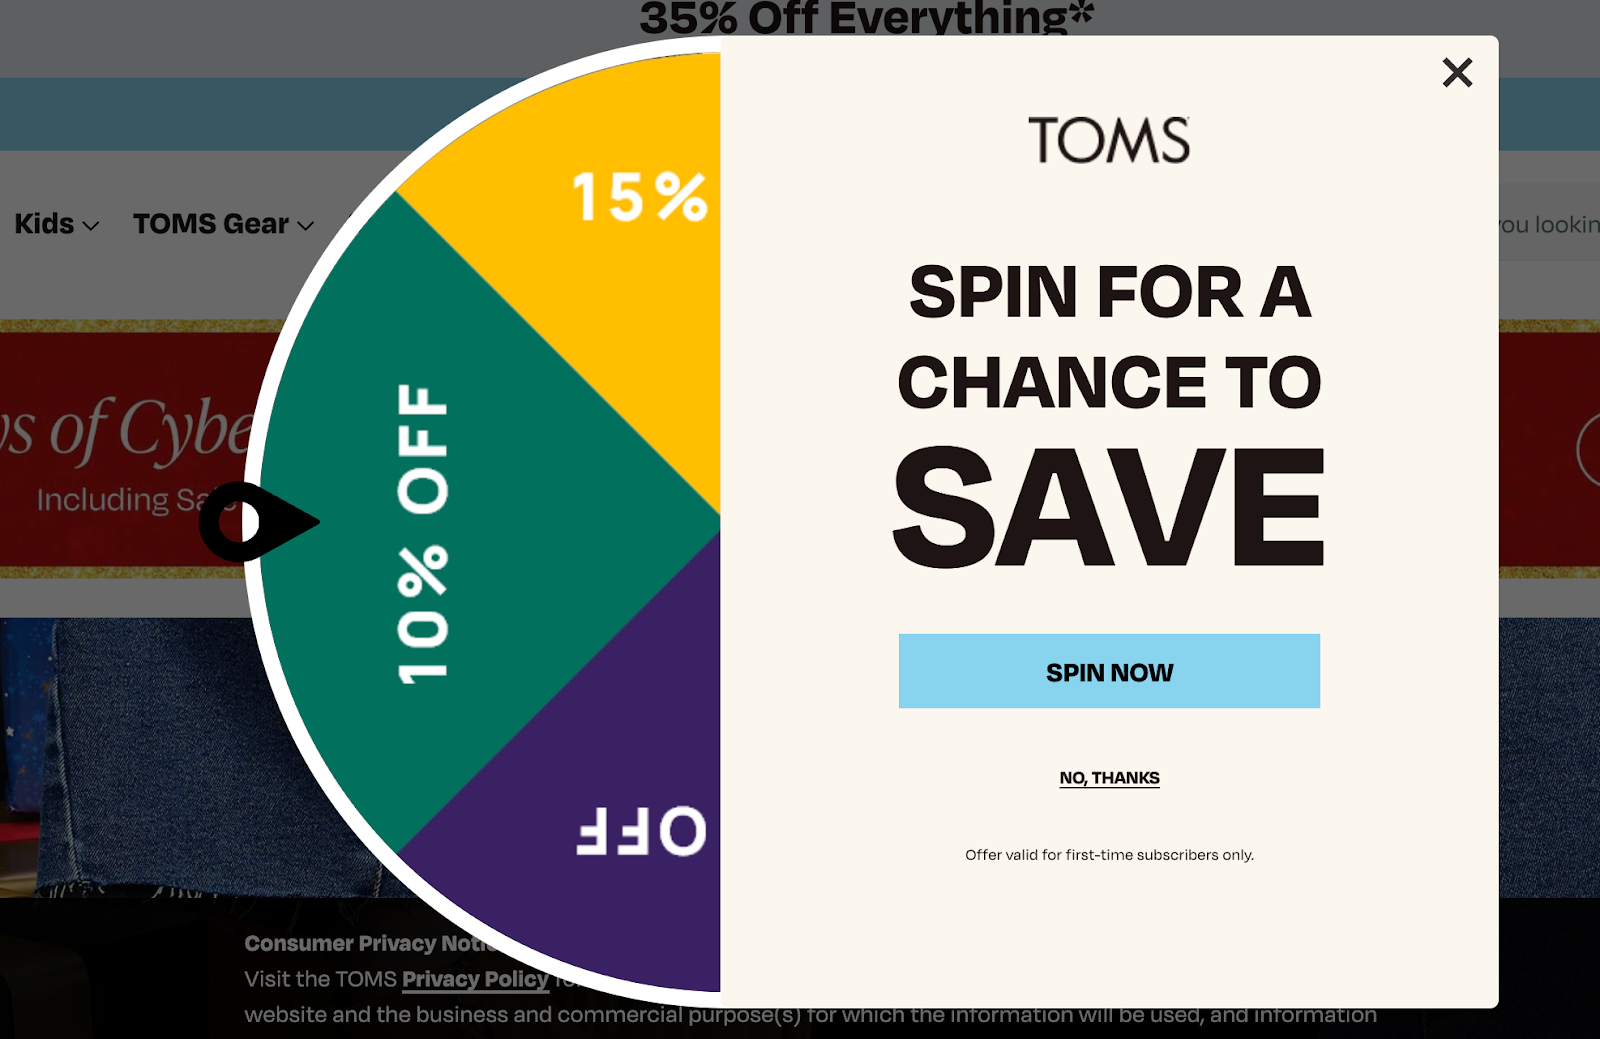 screenshot of TOMS website page using gamification campaigns